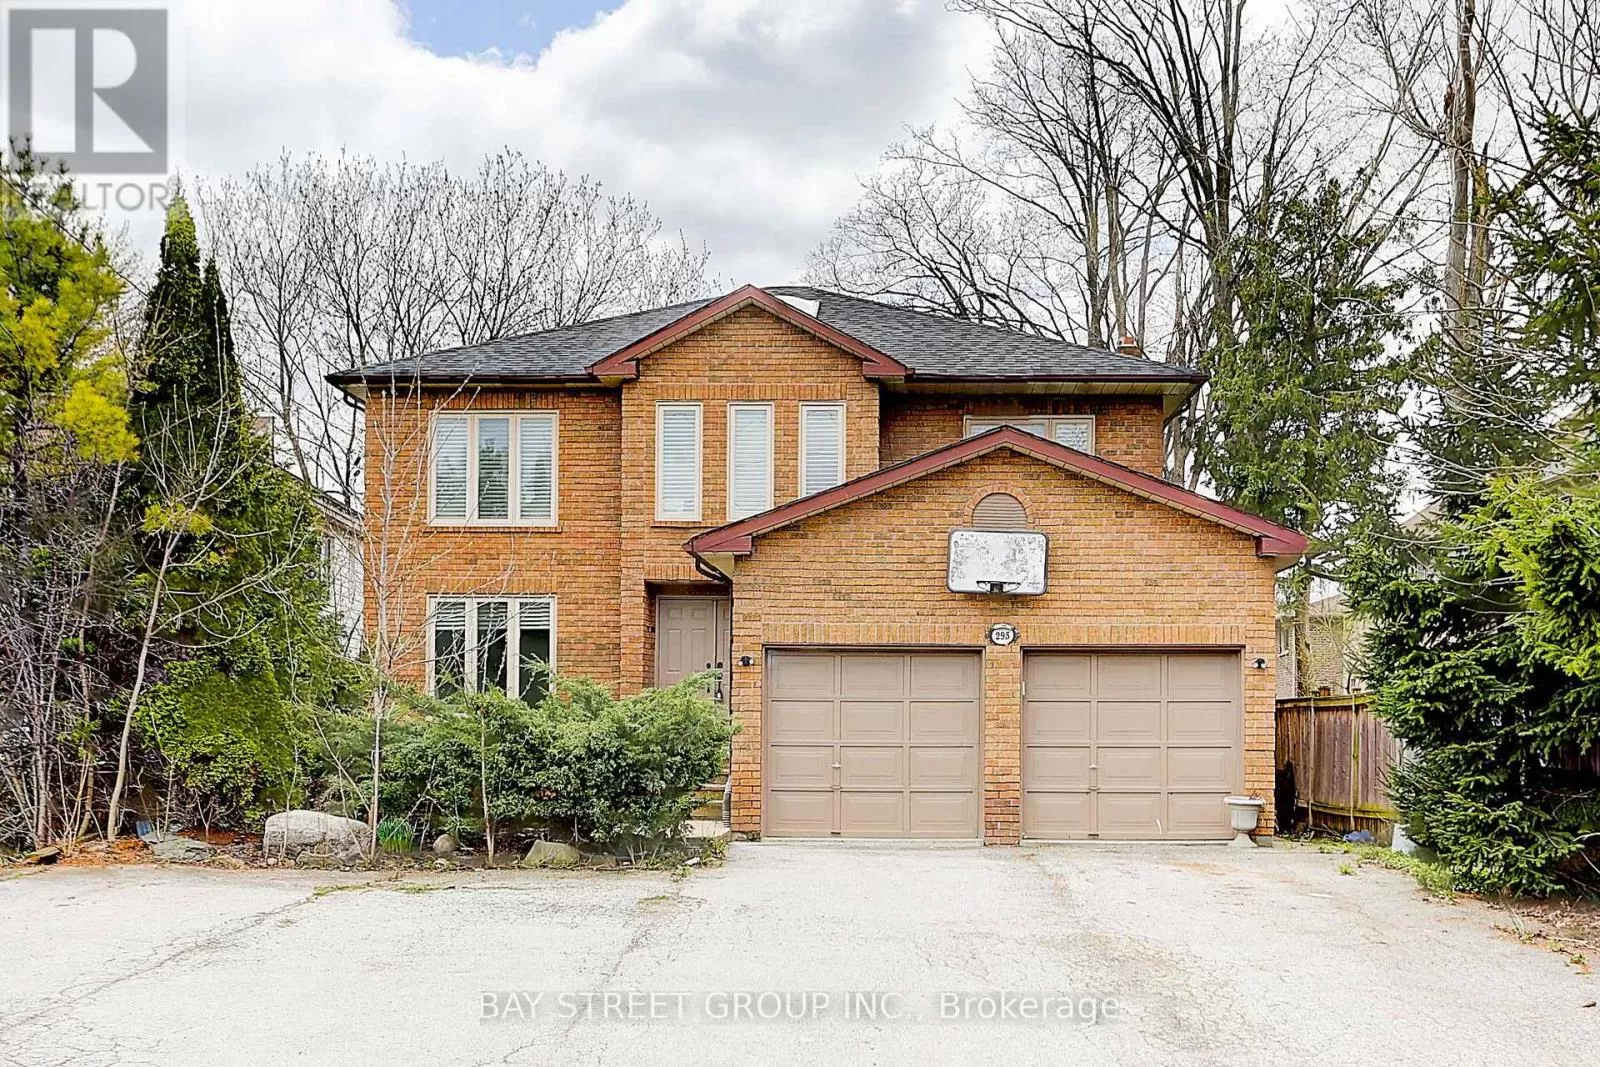 House for rent: 295 Elgin Mills Road W, Richmond Hill, Ontario L4C 4M1